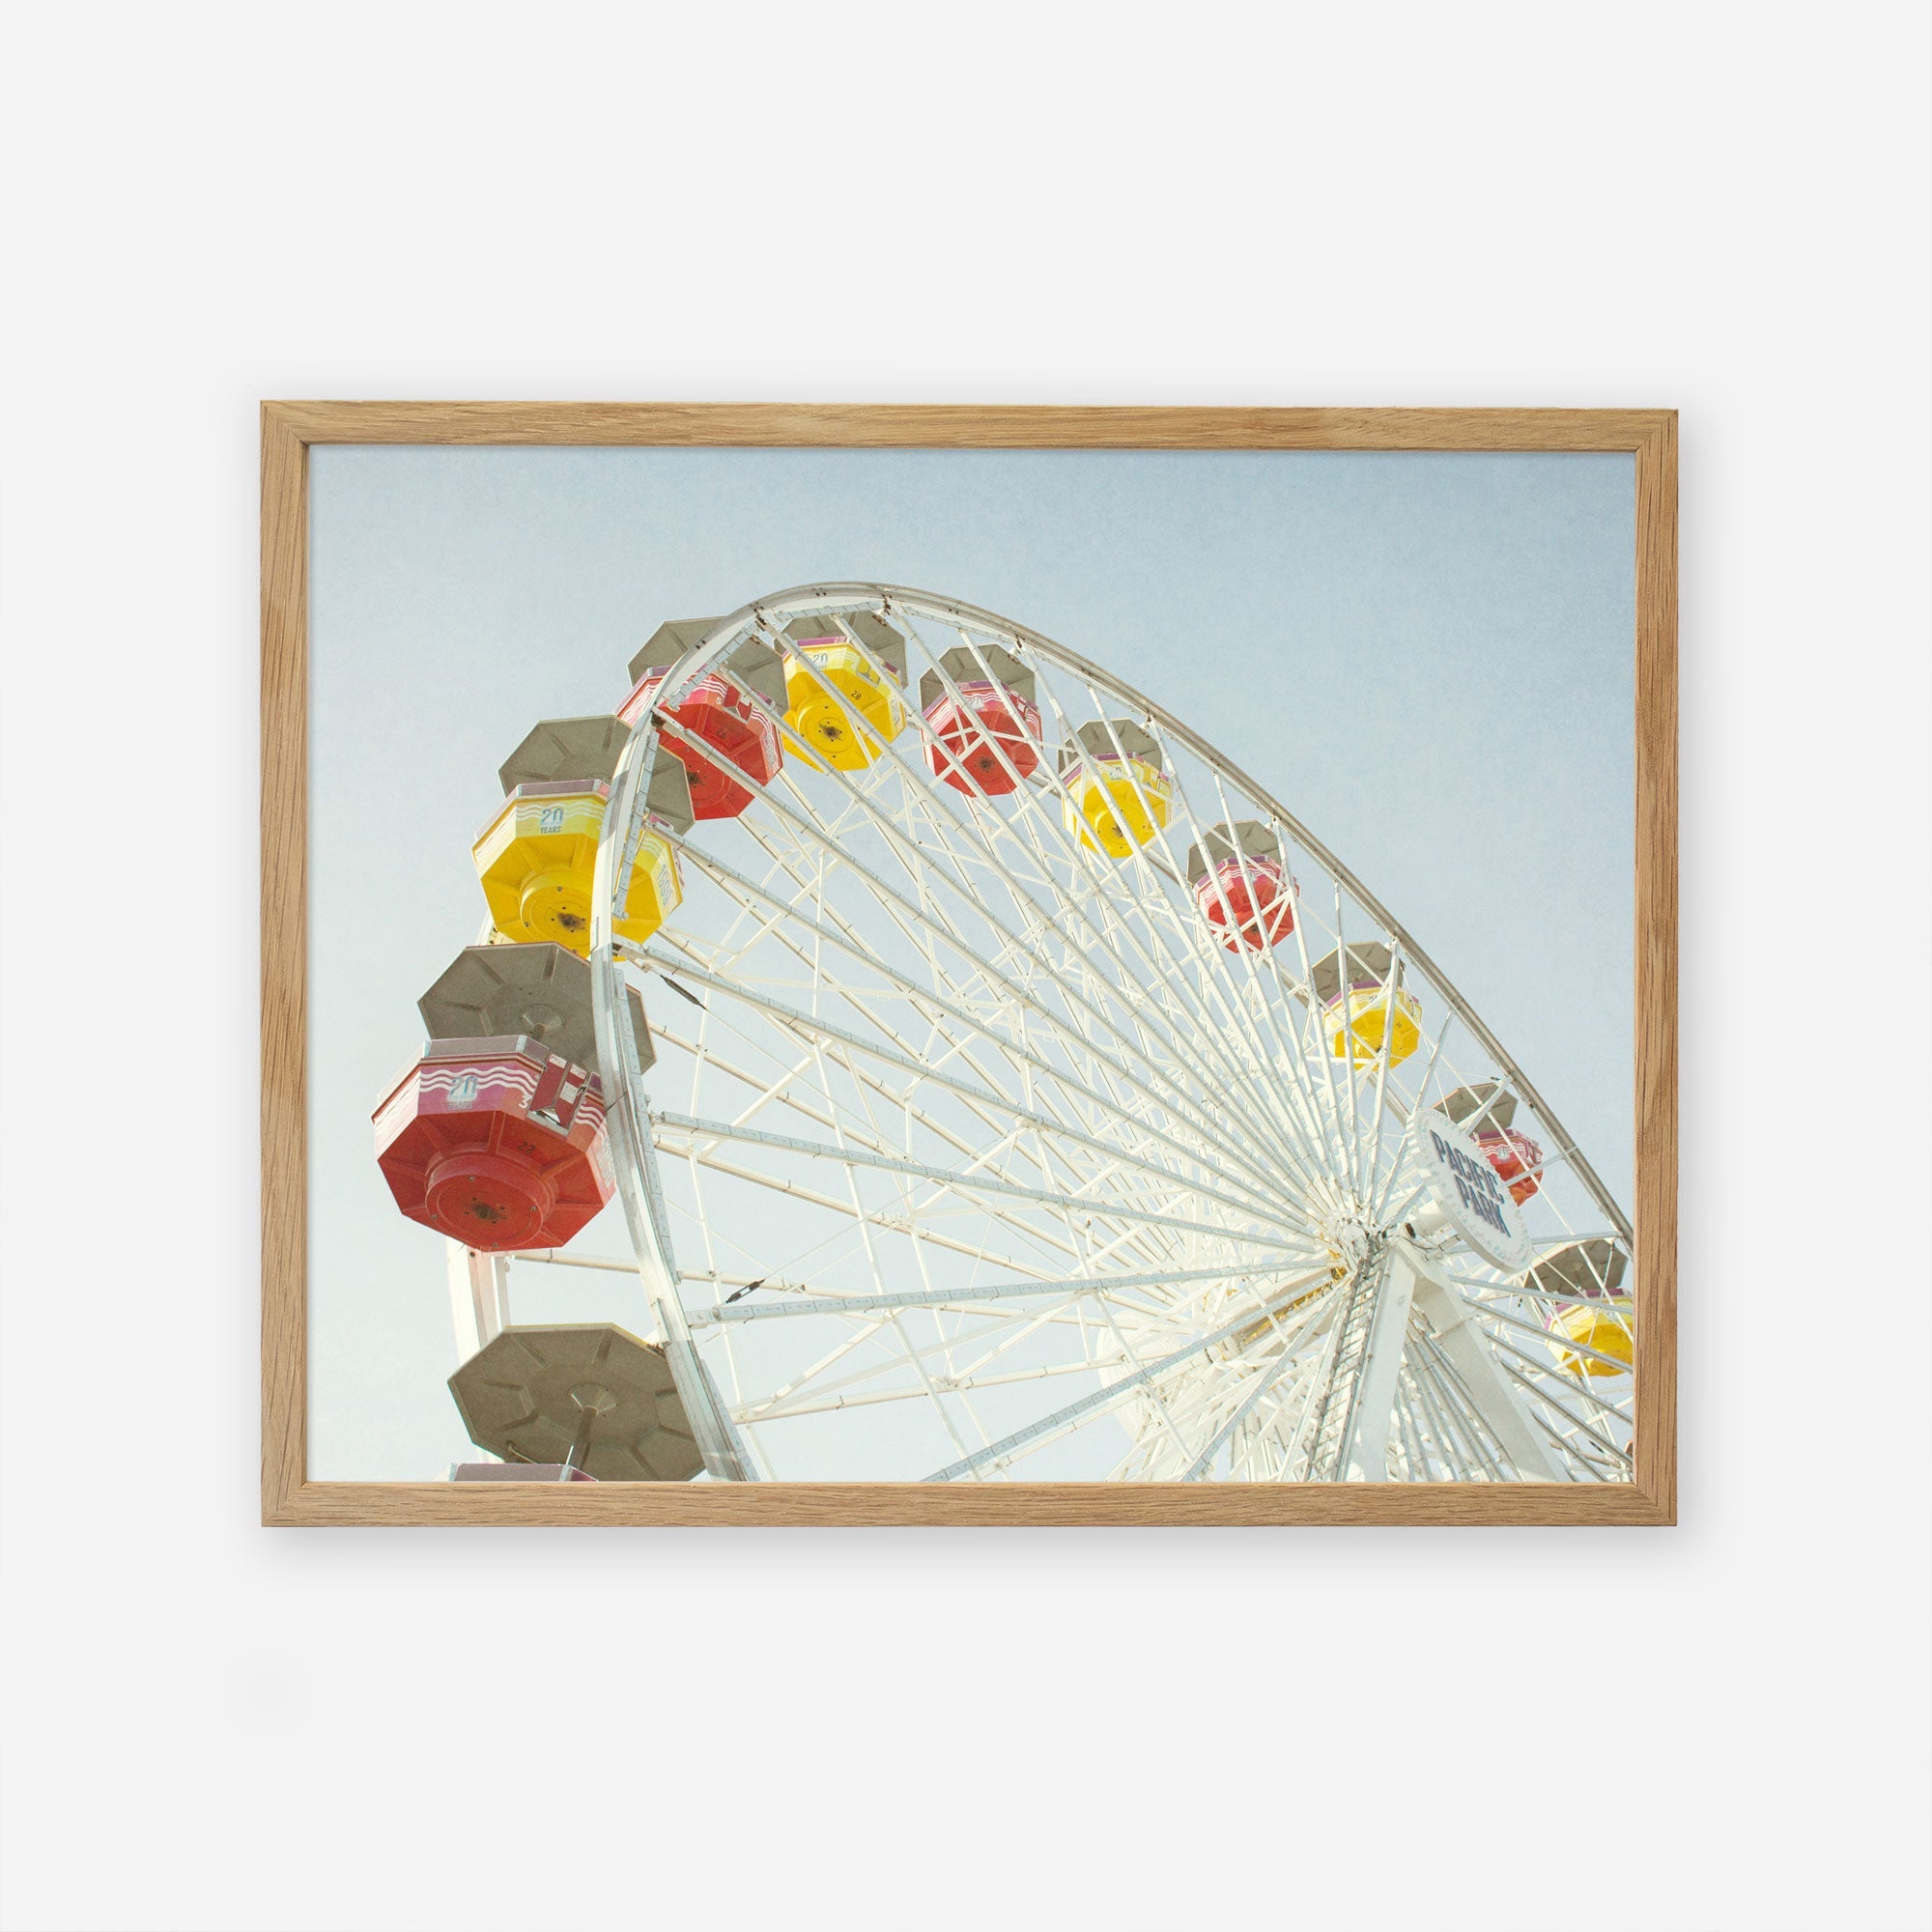 A framed photograph of a Santa Monica Ferris Wheel Print, &#39;Ferris Above&#39; with yellow, red, and gray cabins under a clear sky at Santa Monica Pier, centered within a simple wooden frame against a white background. (Offley Green)